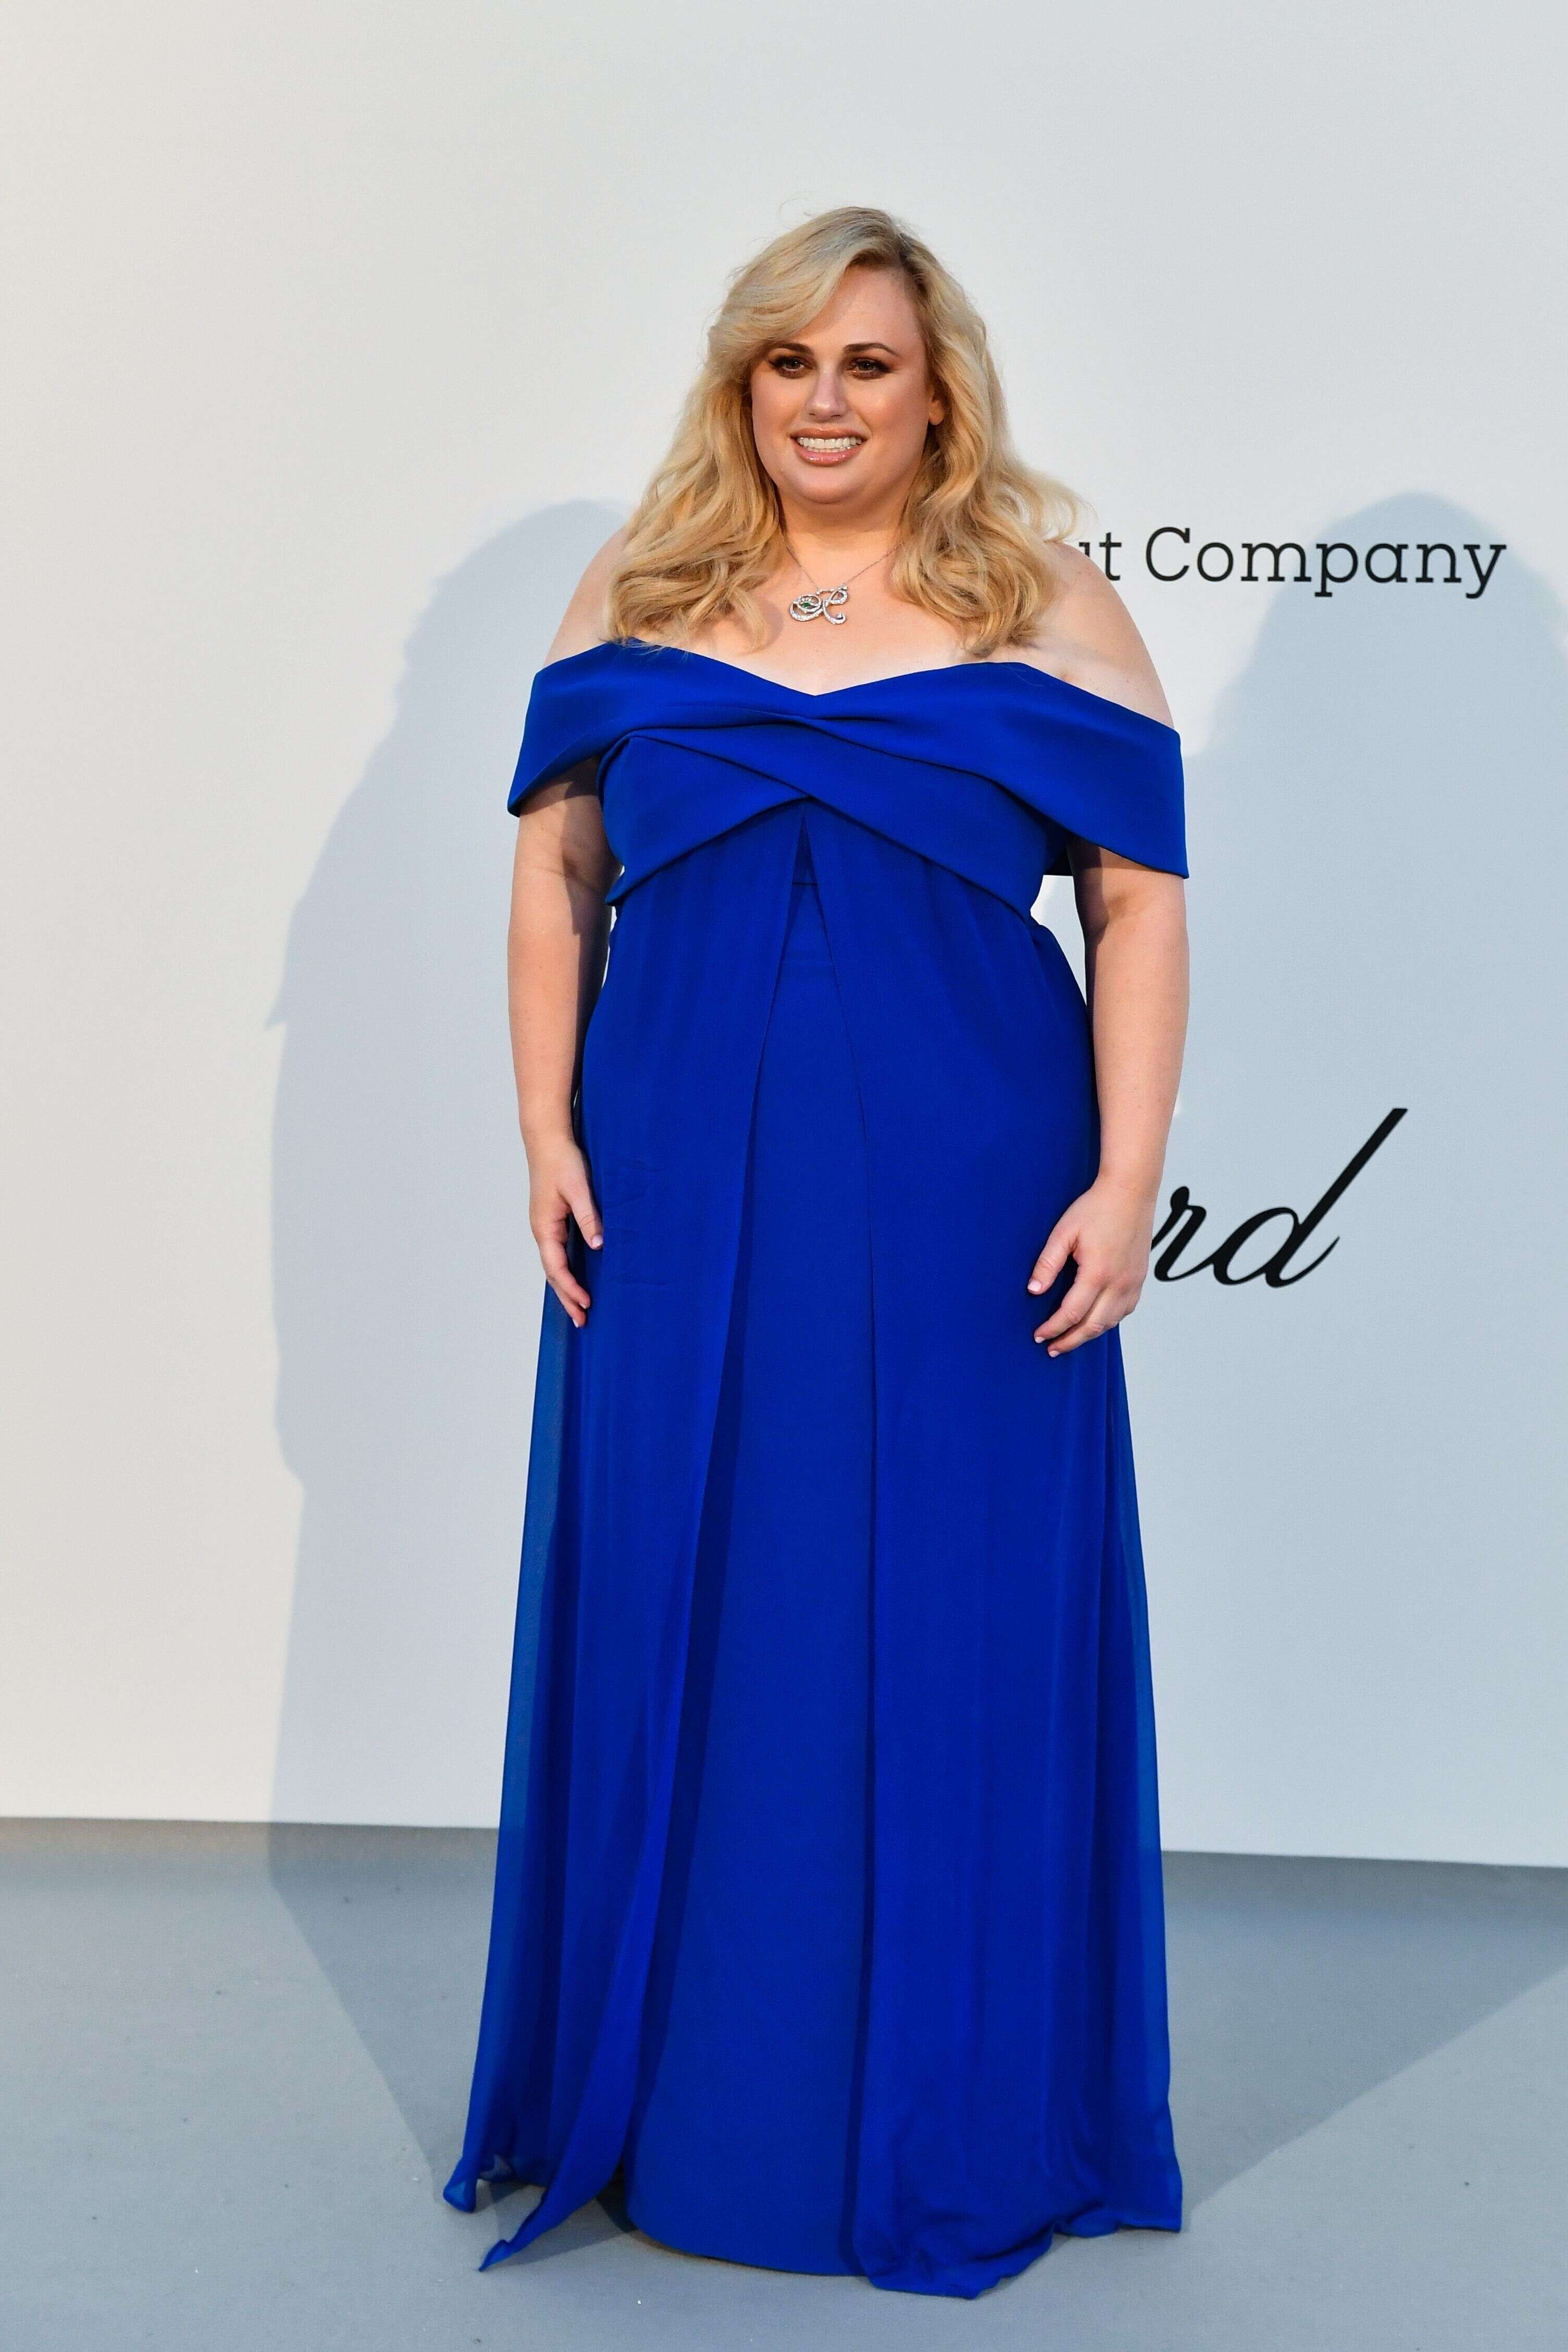 US comedian Rebel Wilson arrives on May 23, 2019 for the amfAR 26th Annual Cinema Against AIDS gala at the Hotel du Cap-Eden-Roc in Cap d'Antibes, southern France, on the sidelines of the 72nd Cannes Film Festival. (Photo by Alberto PIZZOLI / AFP)        (Photo credit should read ALBERTO PIZZOLI/AFP/Getty Images)